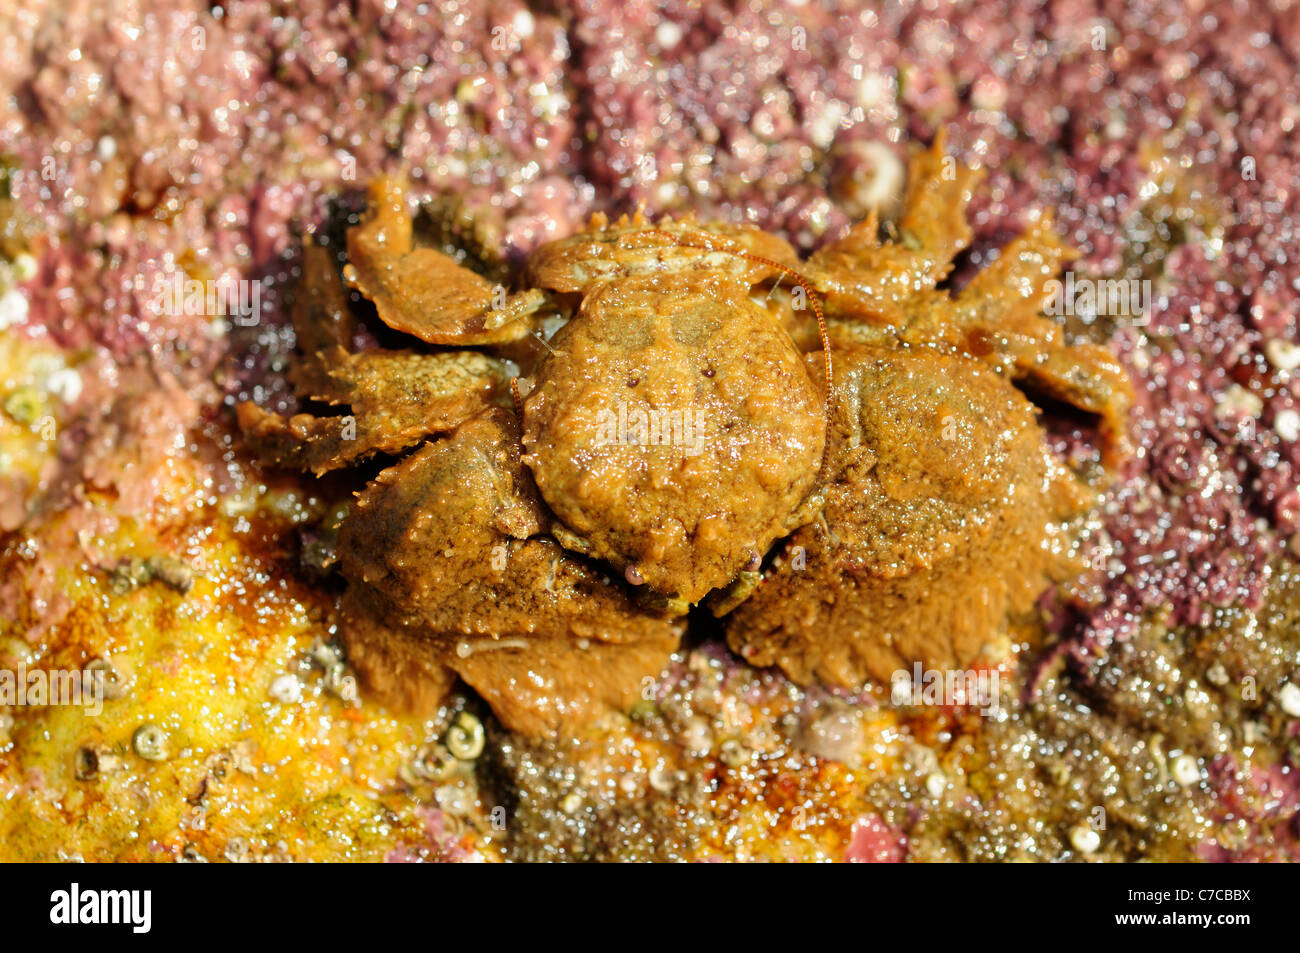 Broad-clawed porcelain crab (Porcellana platycheles) Stock Photo